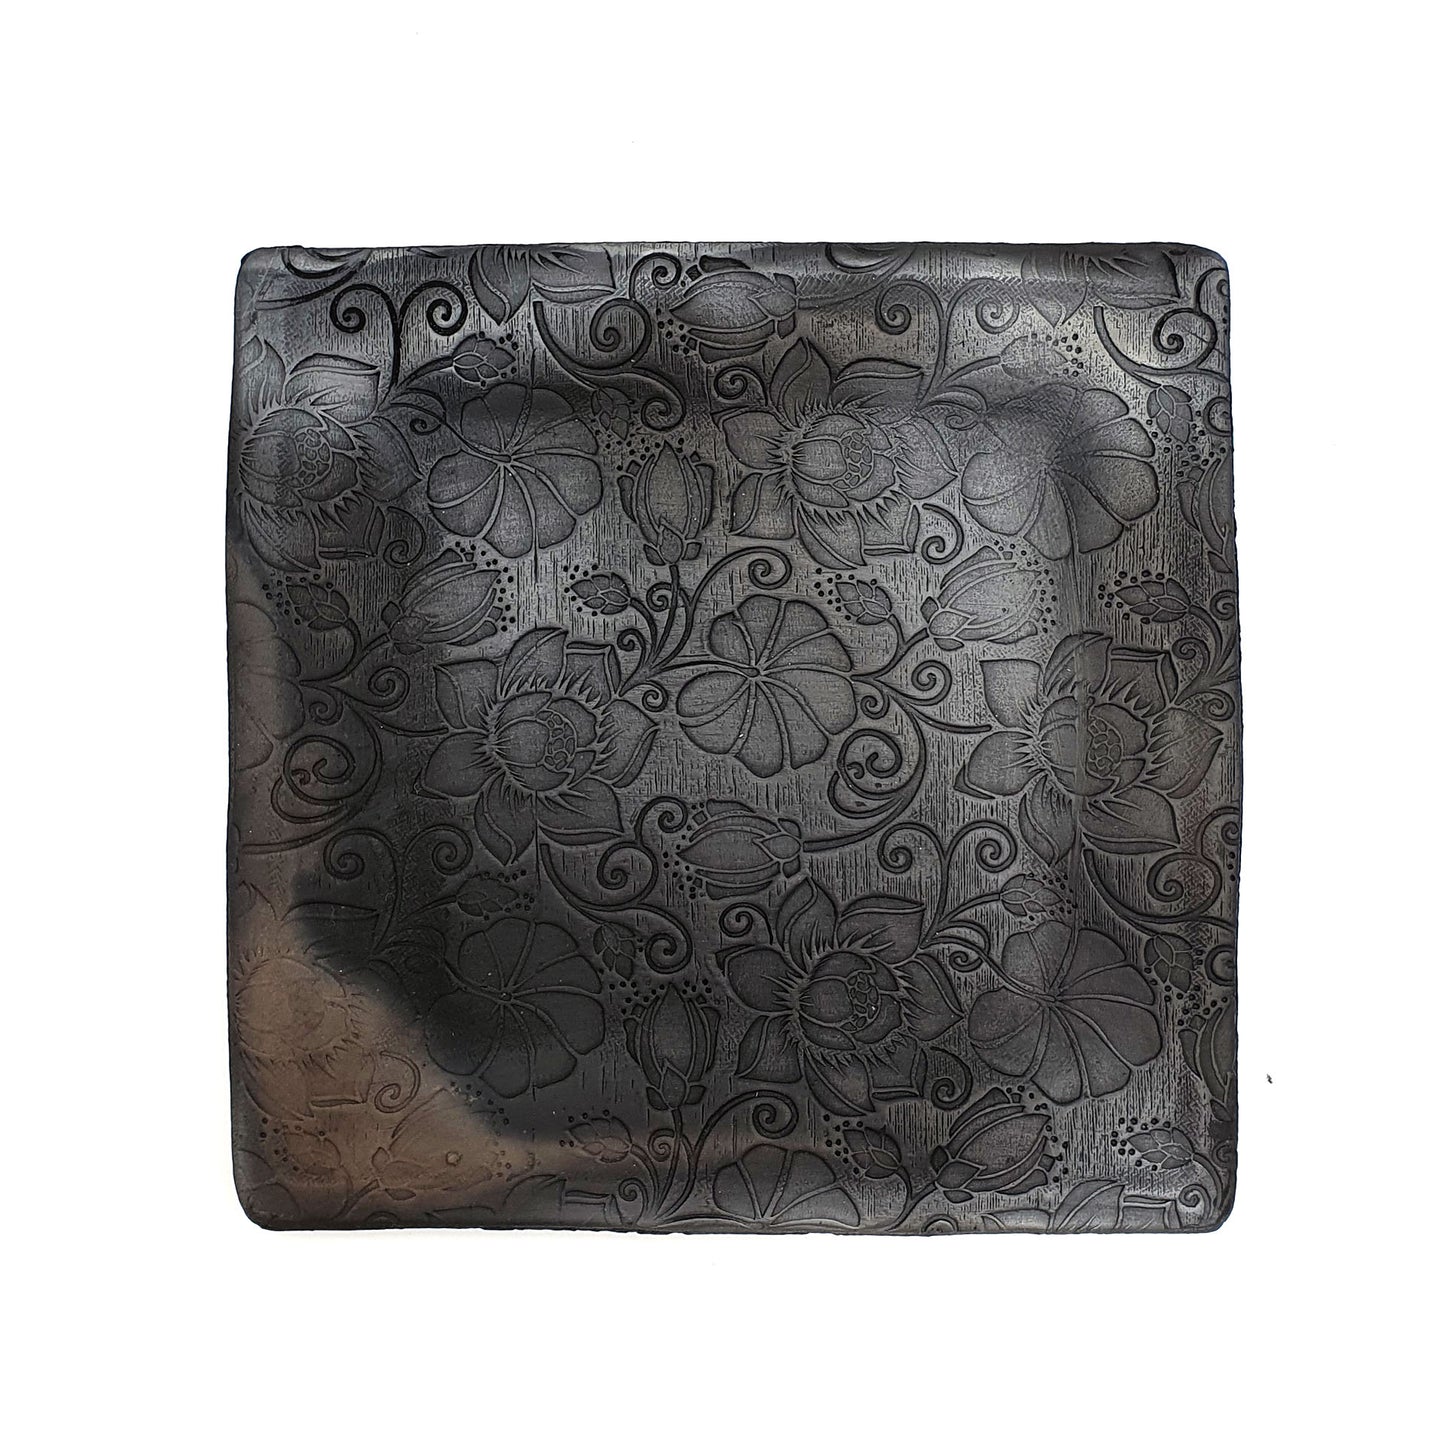 Candle pad, black ceramic with floral pattern, ⌀ 15 cm